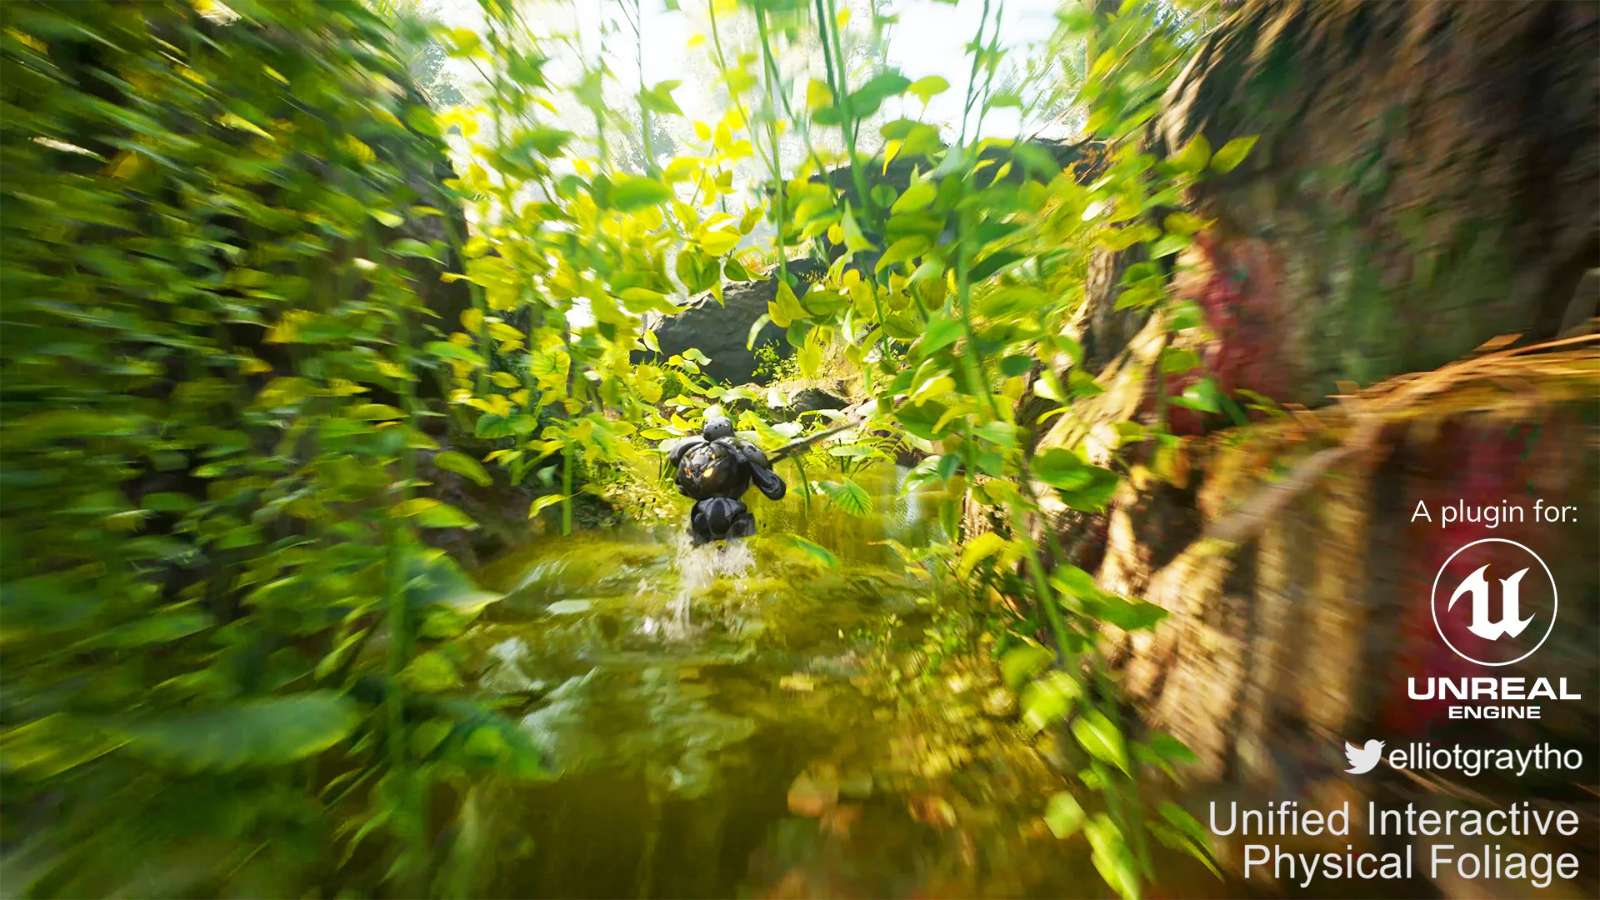 UIPF - Unified Interactive Physical Foliage 1.6.1适配UE4.27，5.0交互植物